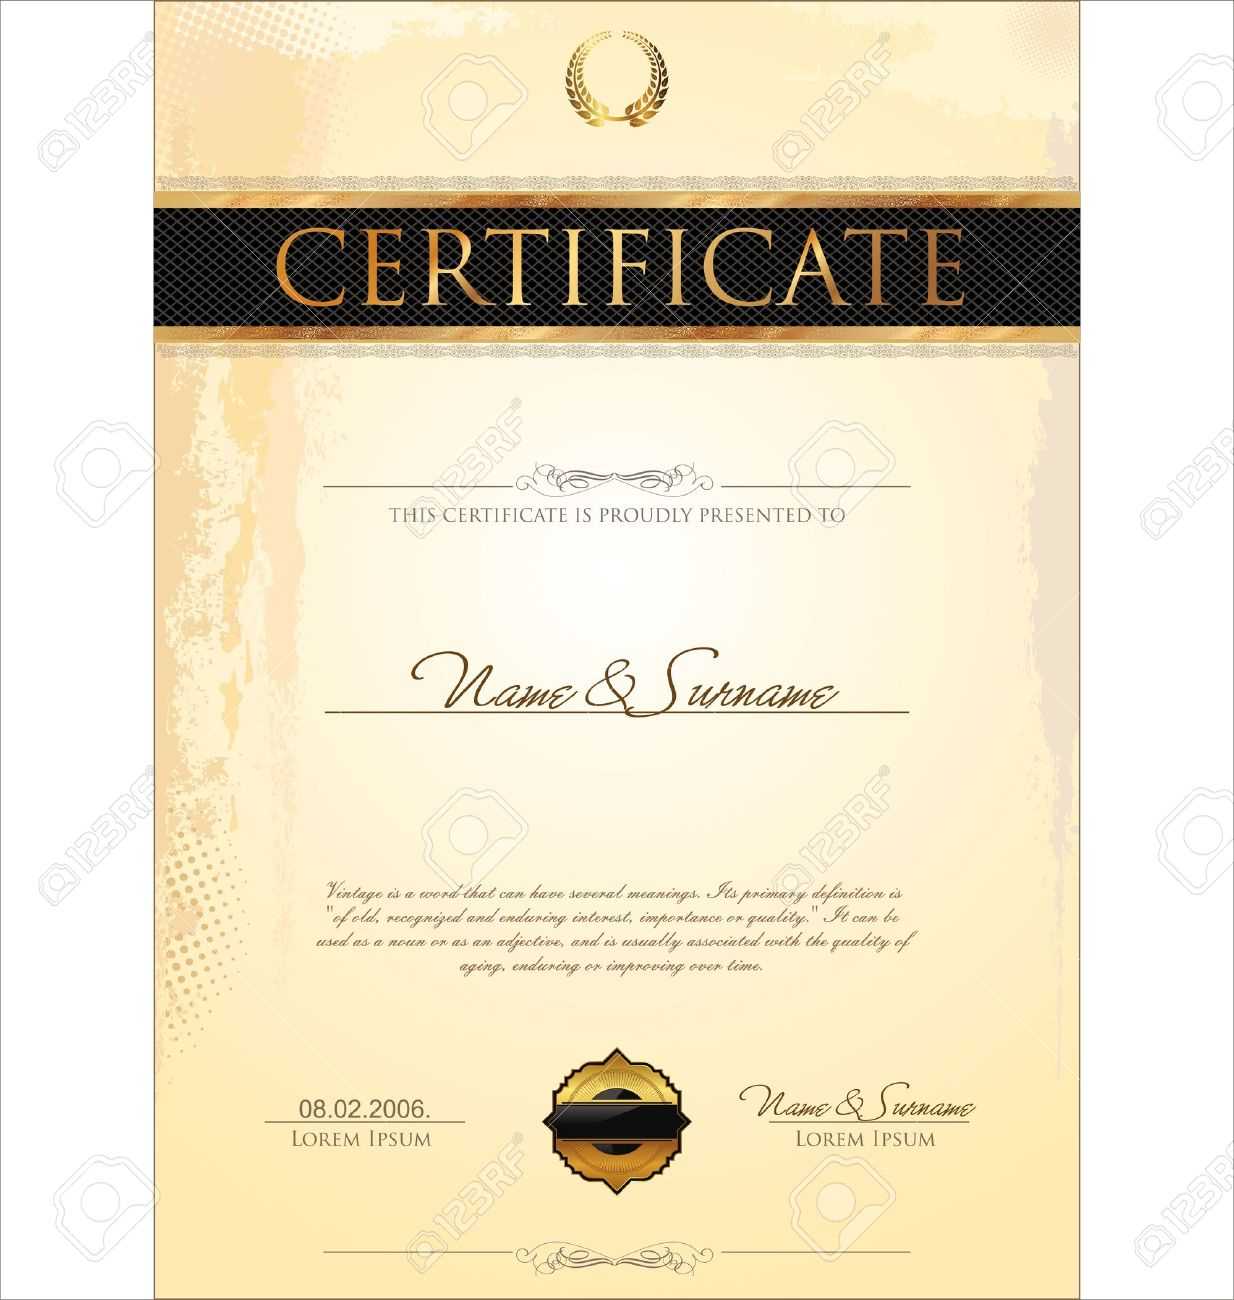 Certificate Template With Regard To Stock Certificate Template Word